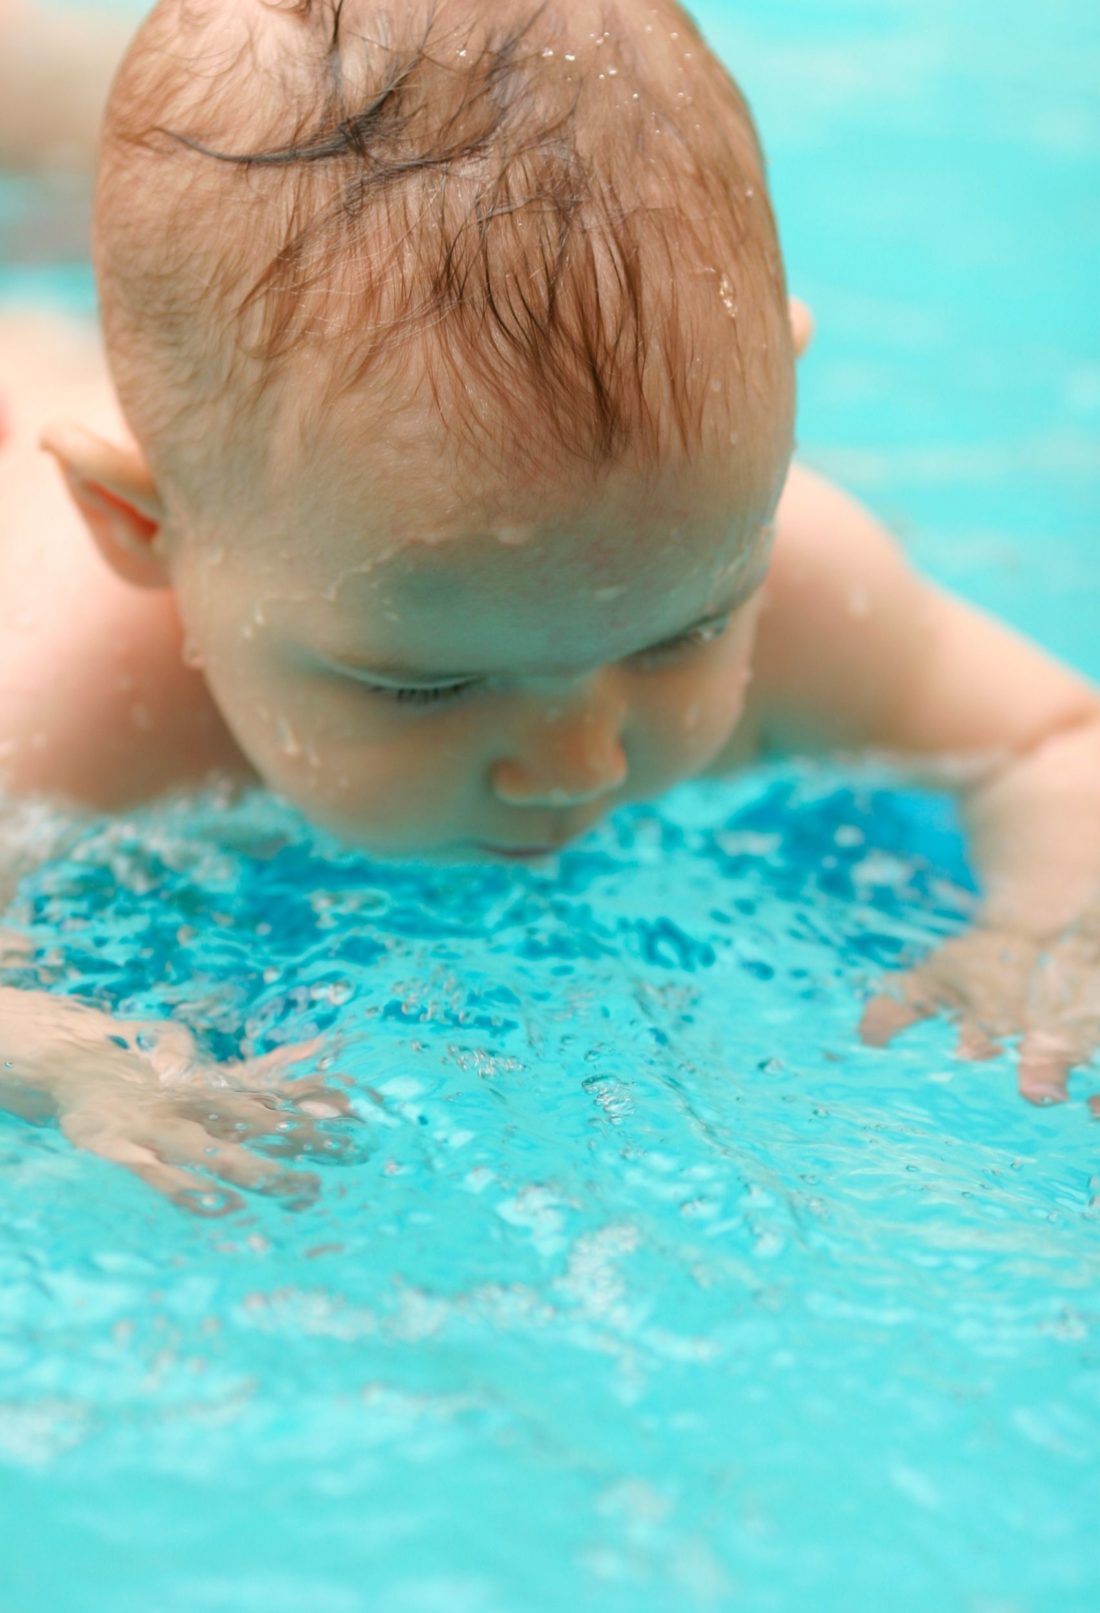 How Learning To Swim At An Early Age Could Help Your Child's Development